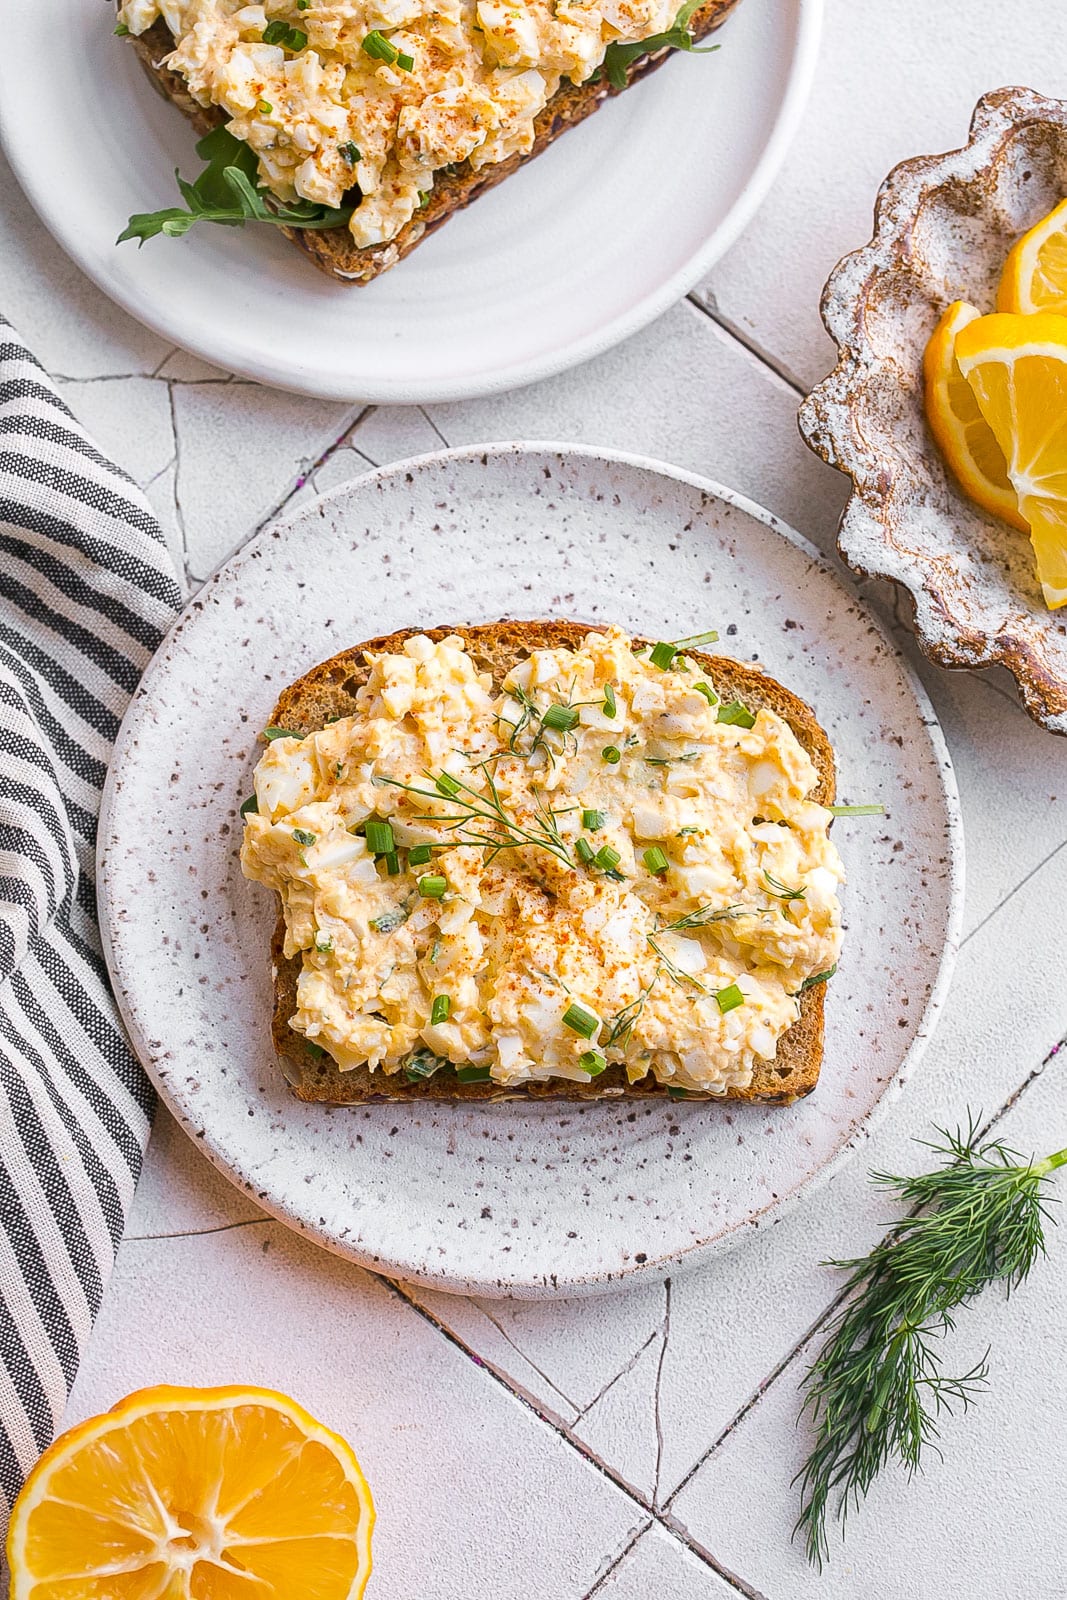 Sliced bread with egg salad on a plate.